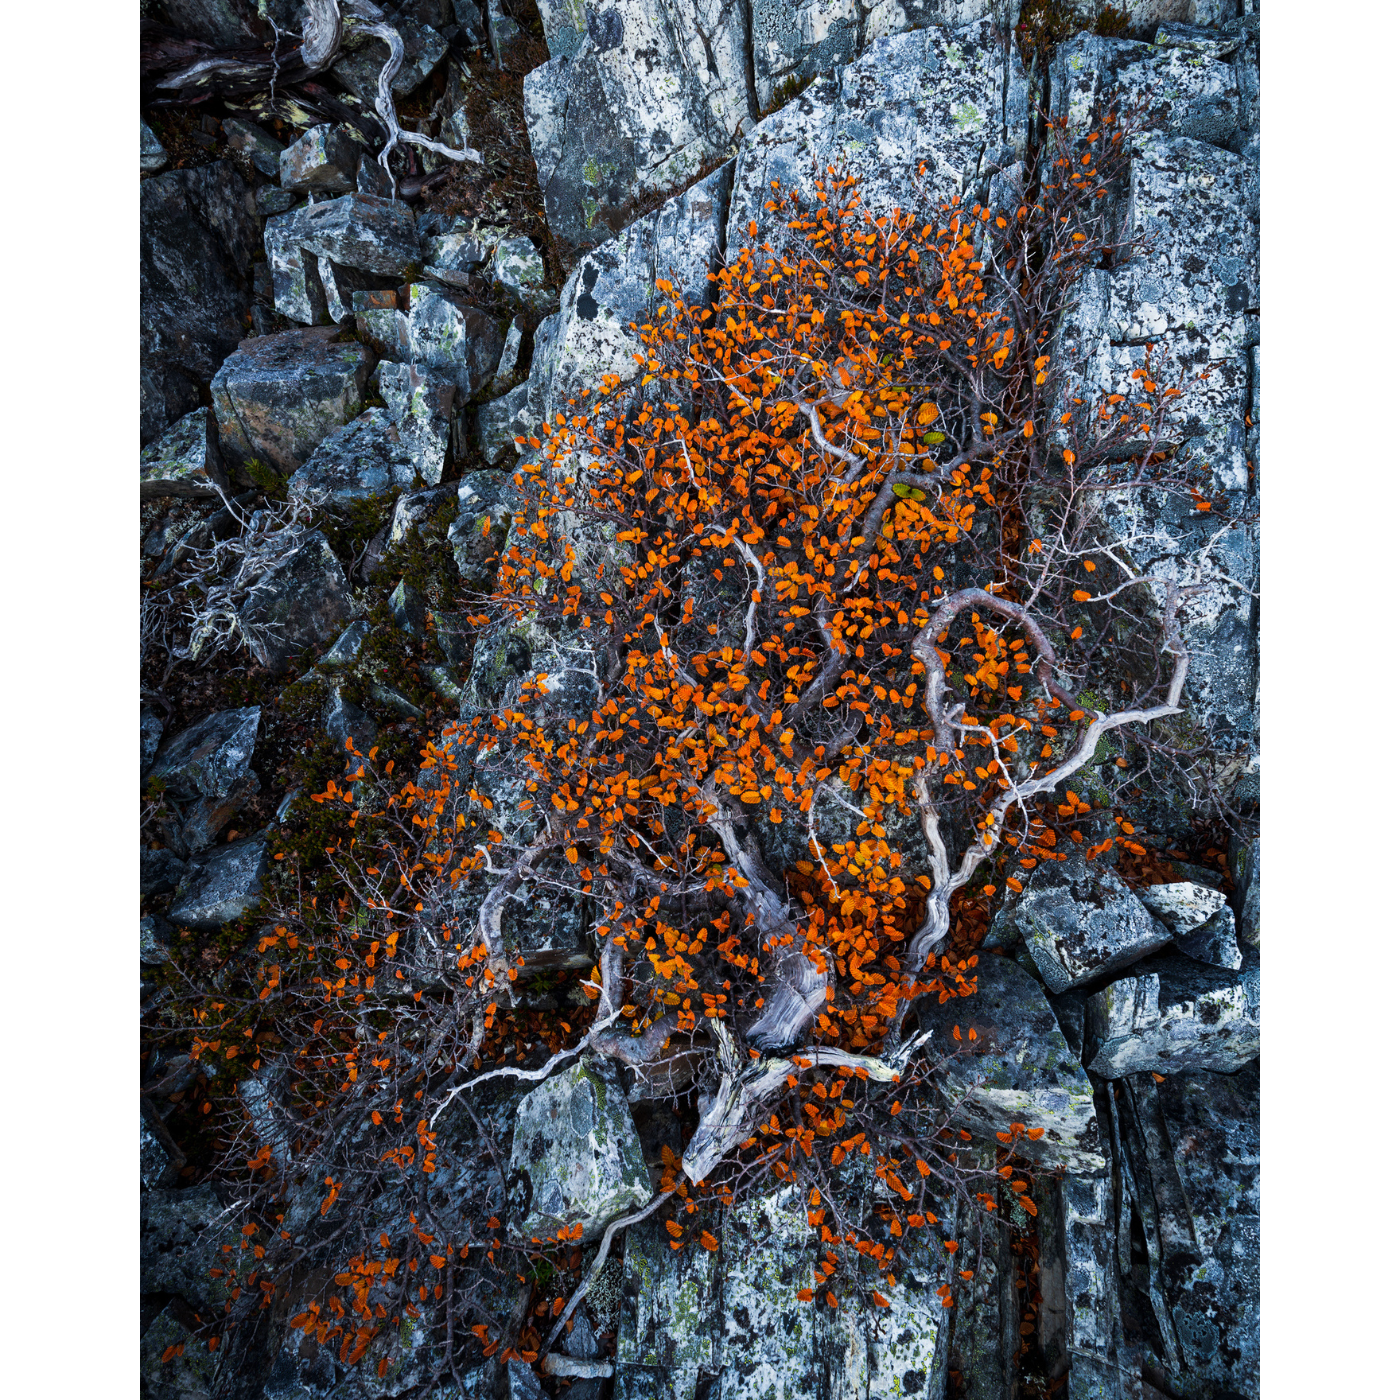 Nick Monk - Prostrate Fagus, Cradle Mountain